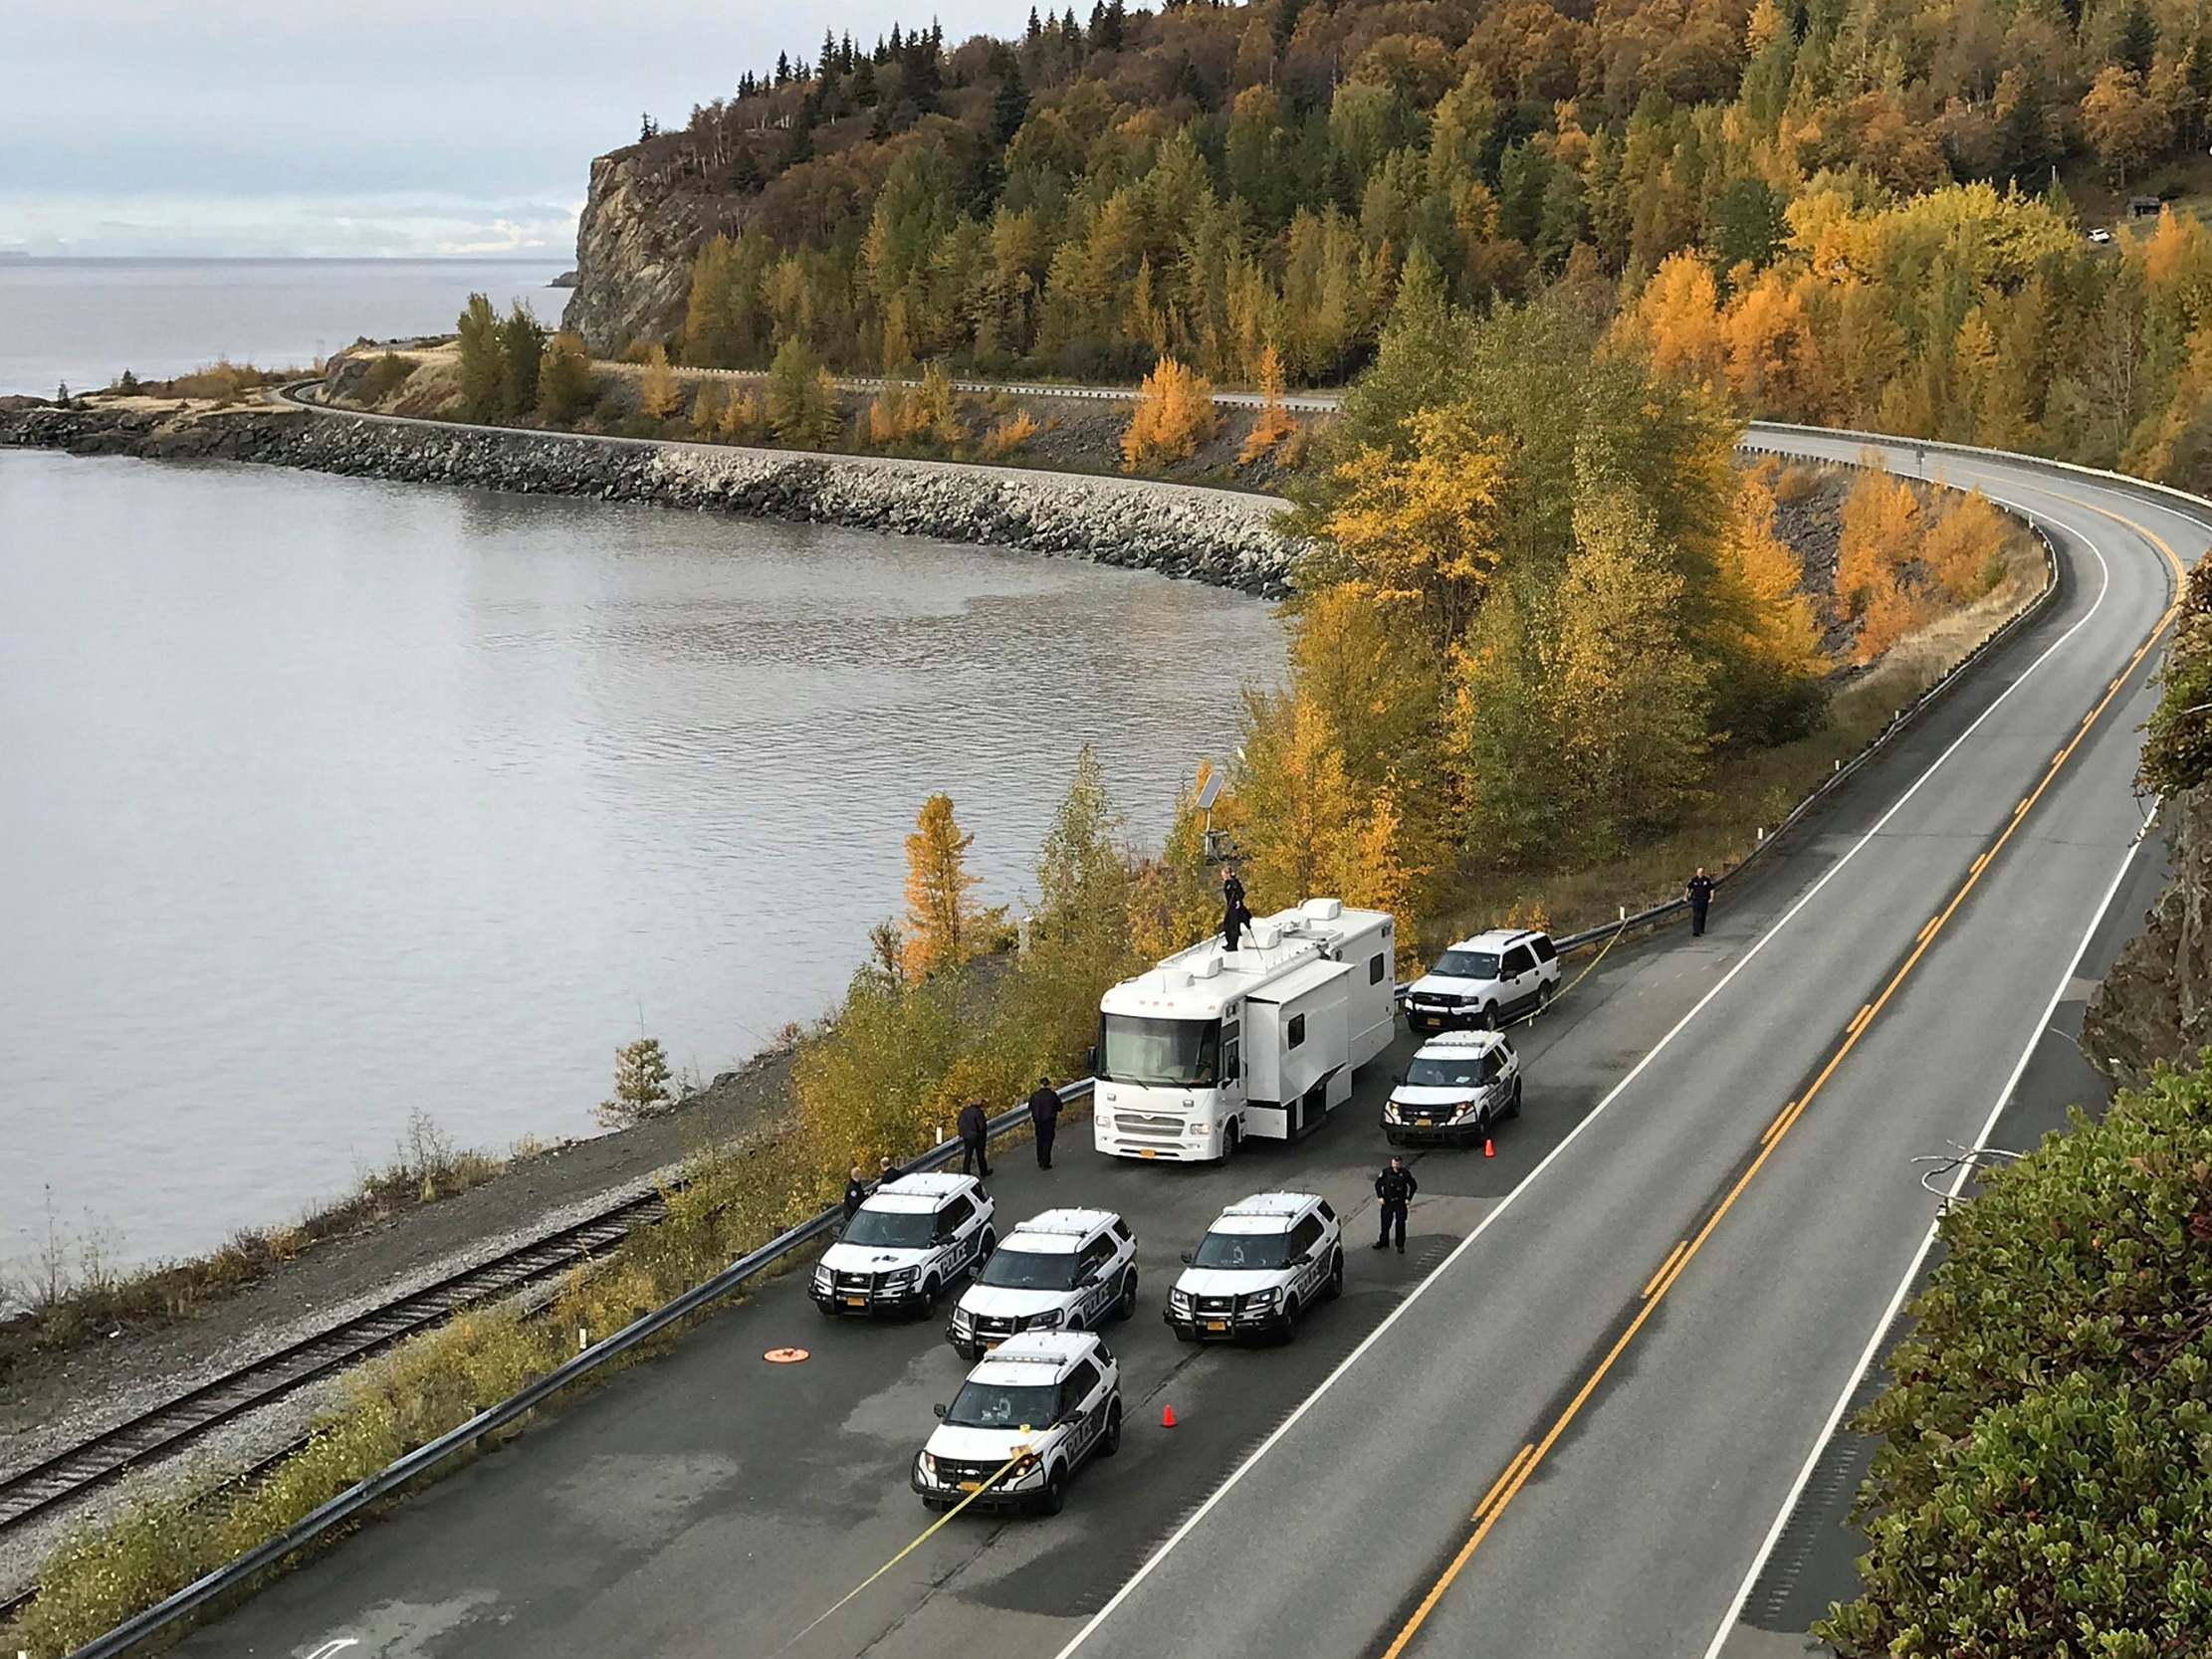 Anchorage Police were seen investigating the scene where human remains were found on the Seward Highway in Anchorage, Alaska, 2 October 2019